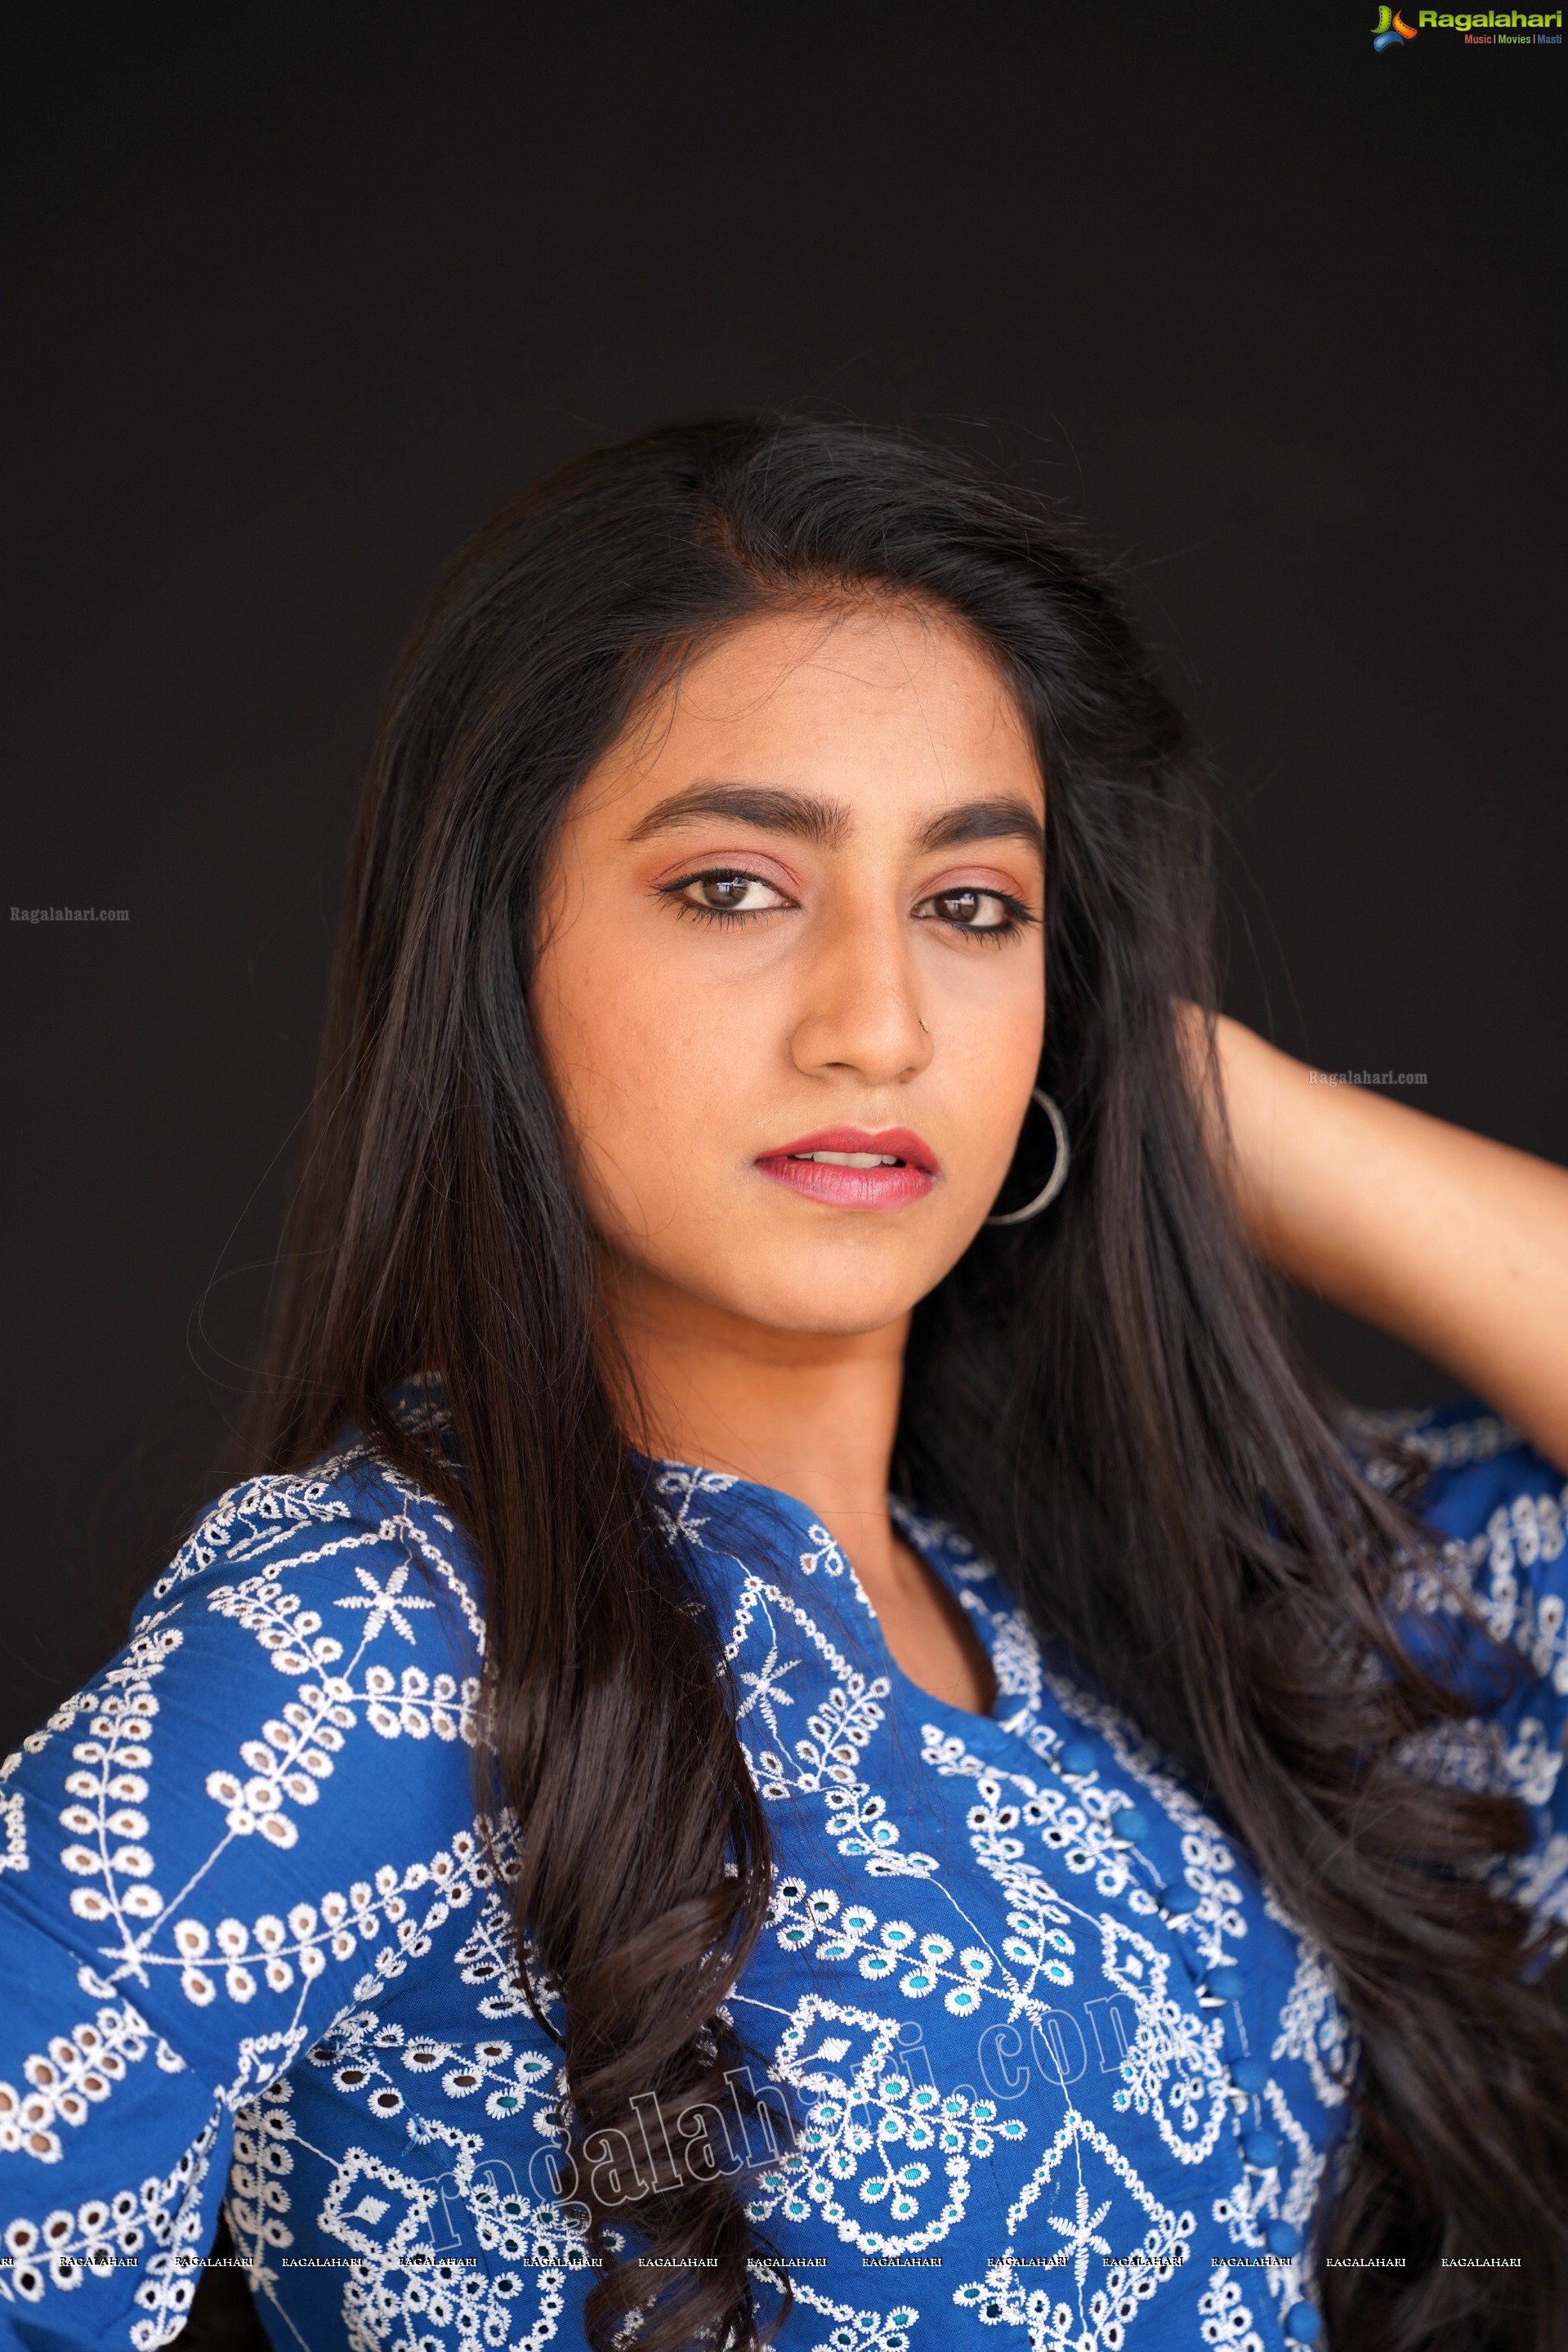 Yuktha in Blue Printed Top and Jeans, Exclusive Photoshoot